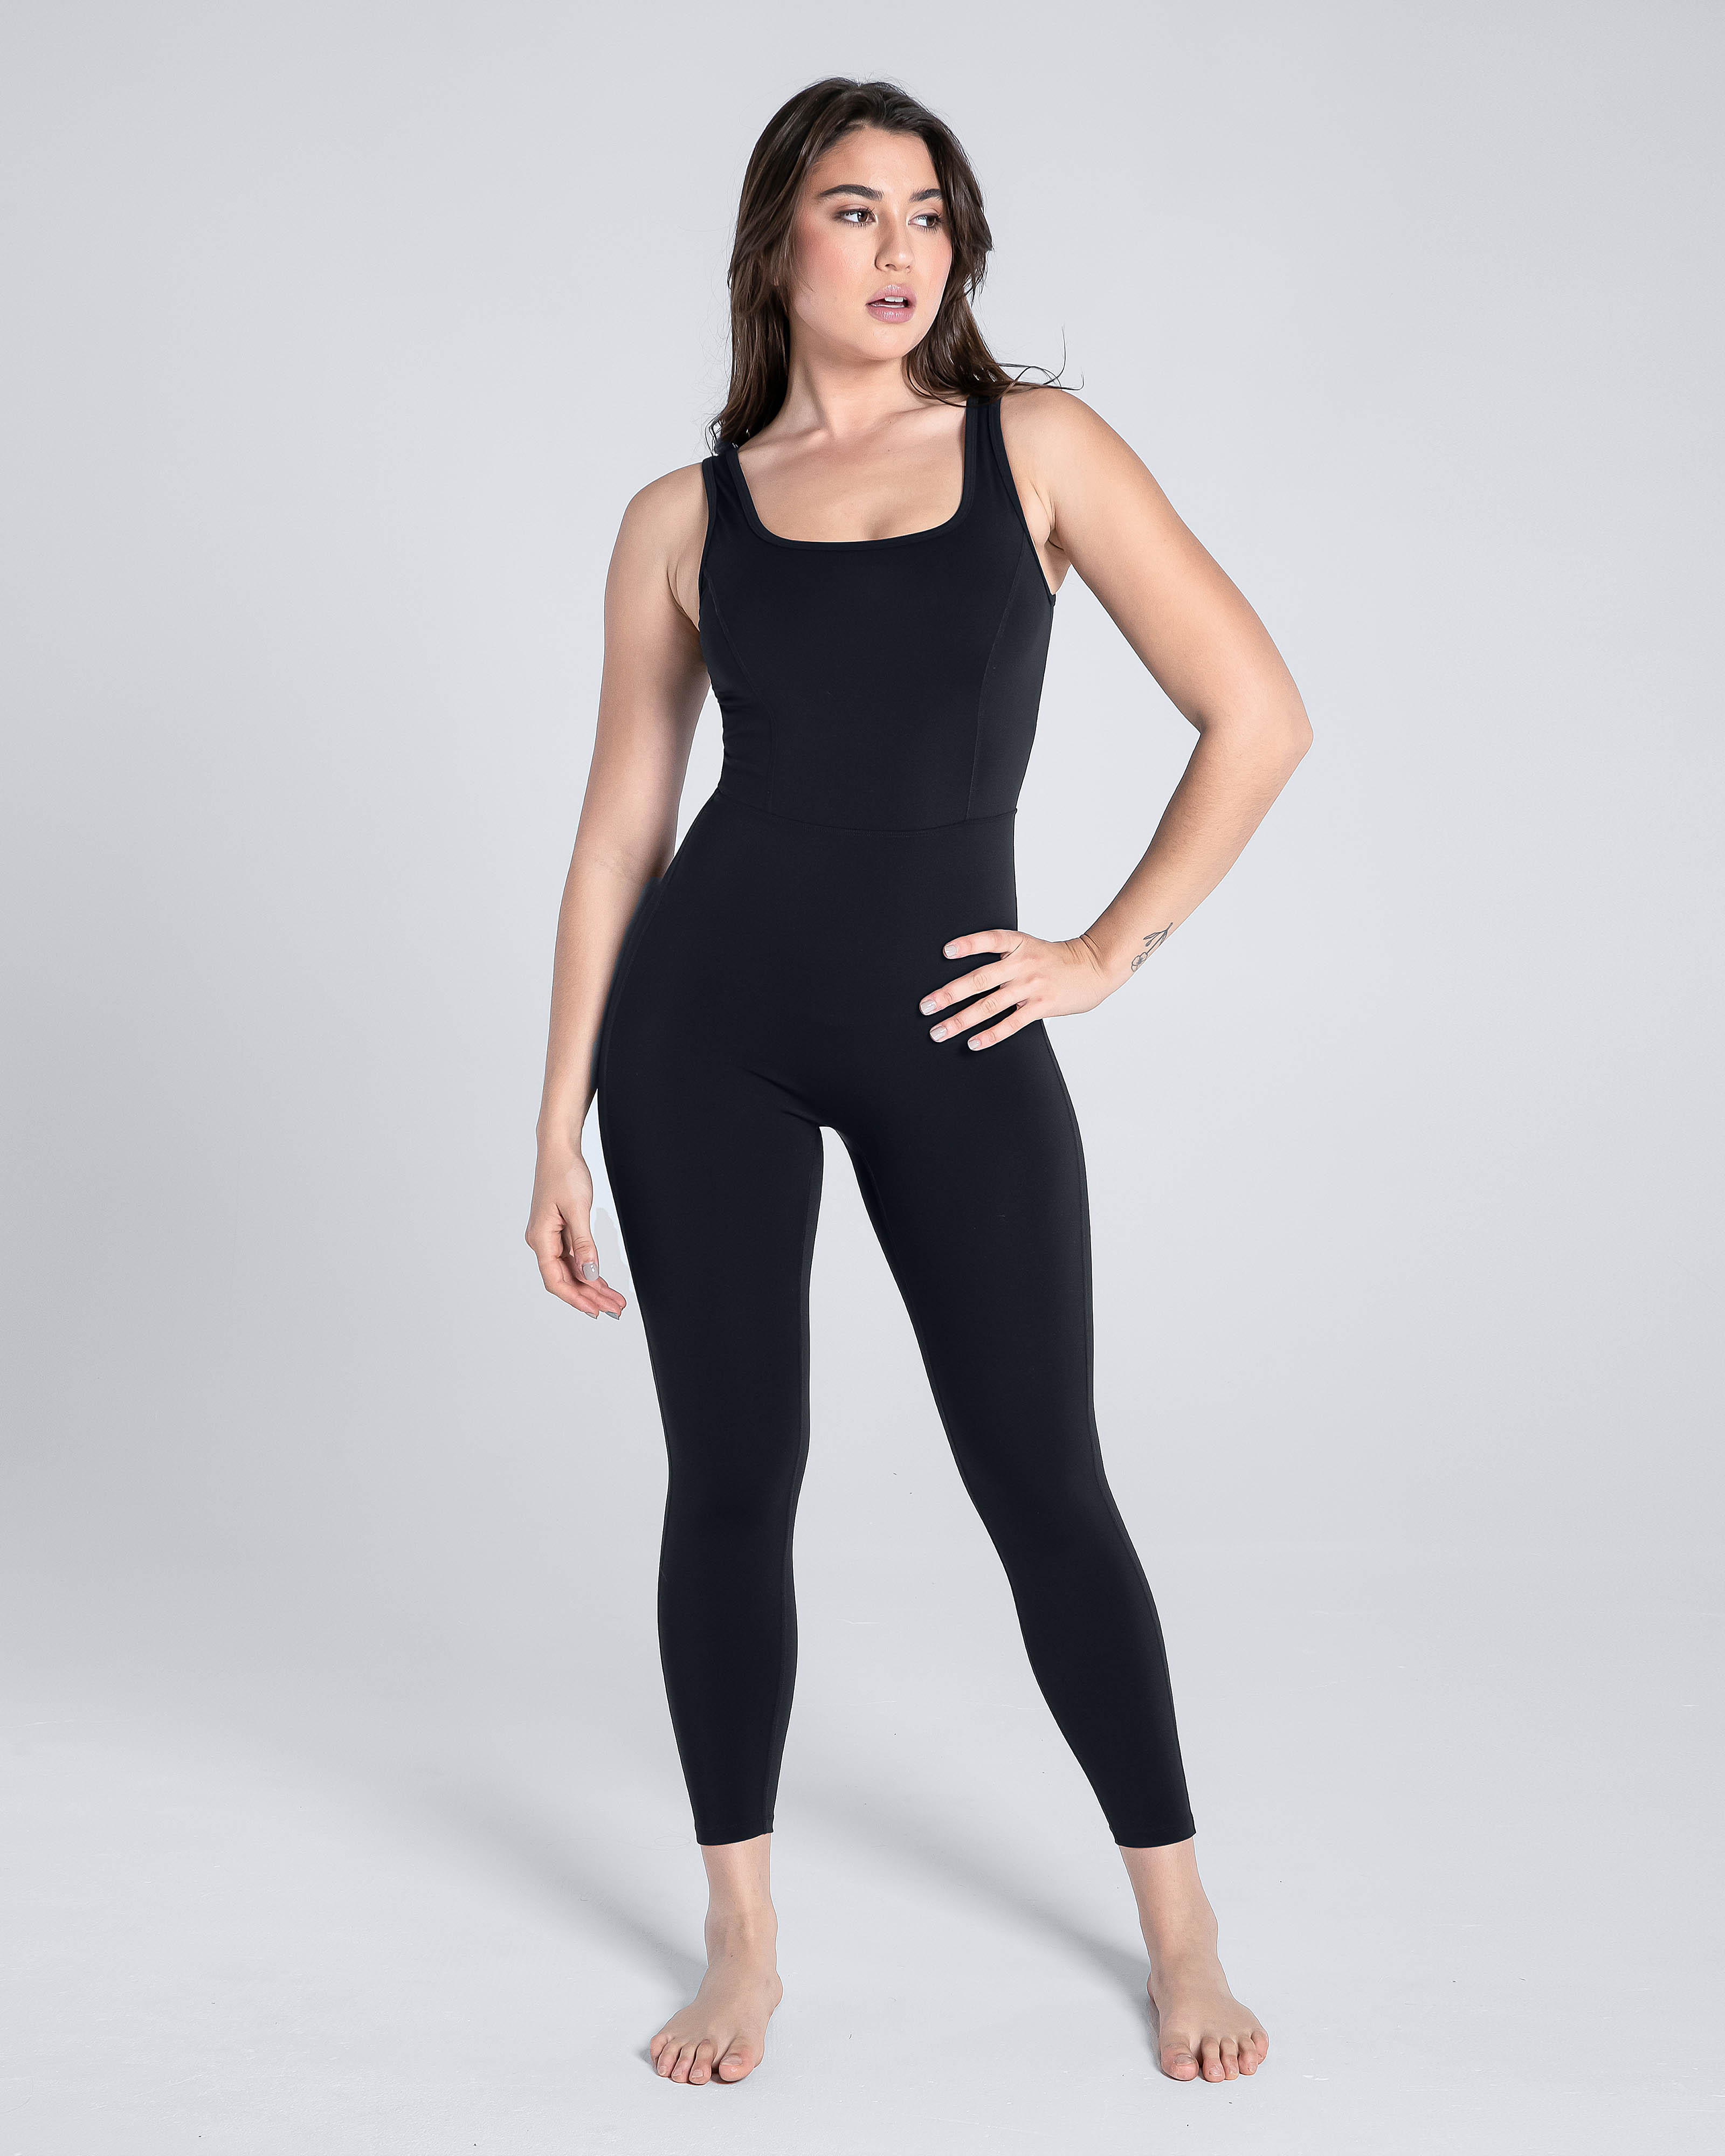 Cosmolle Activewear Sets to Motivate You to Workout from Home - Andayani  Rhani